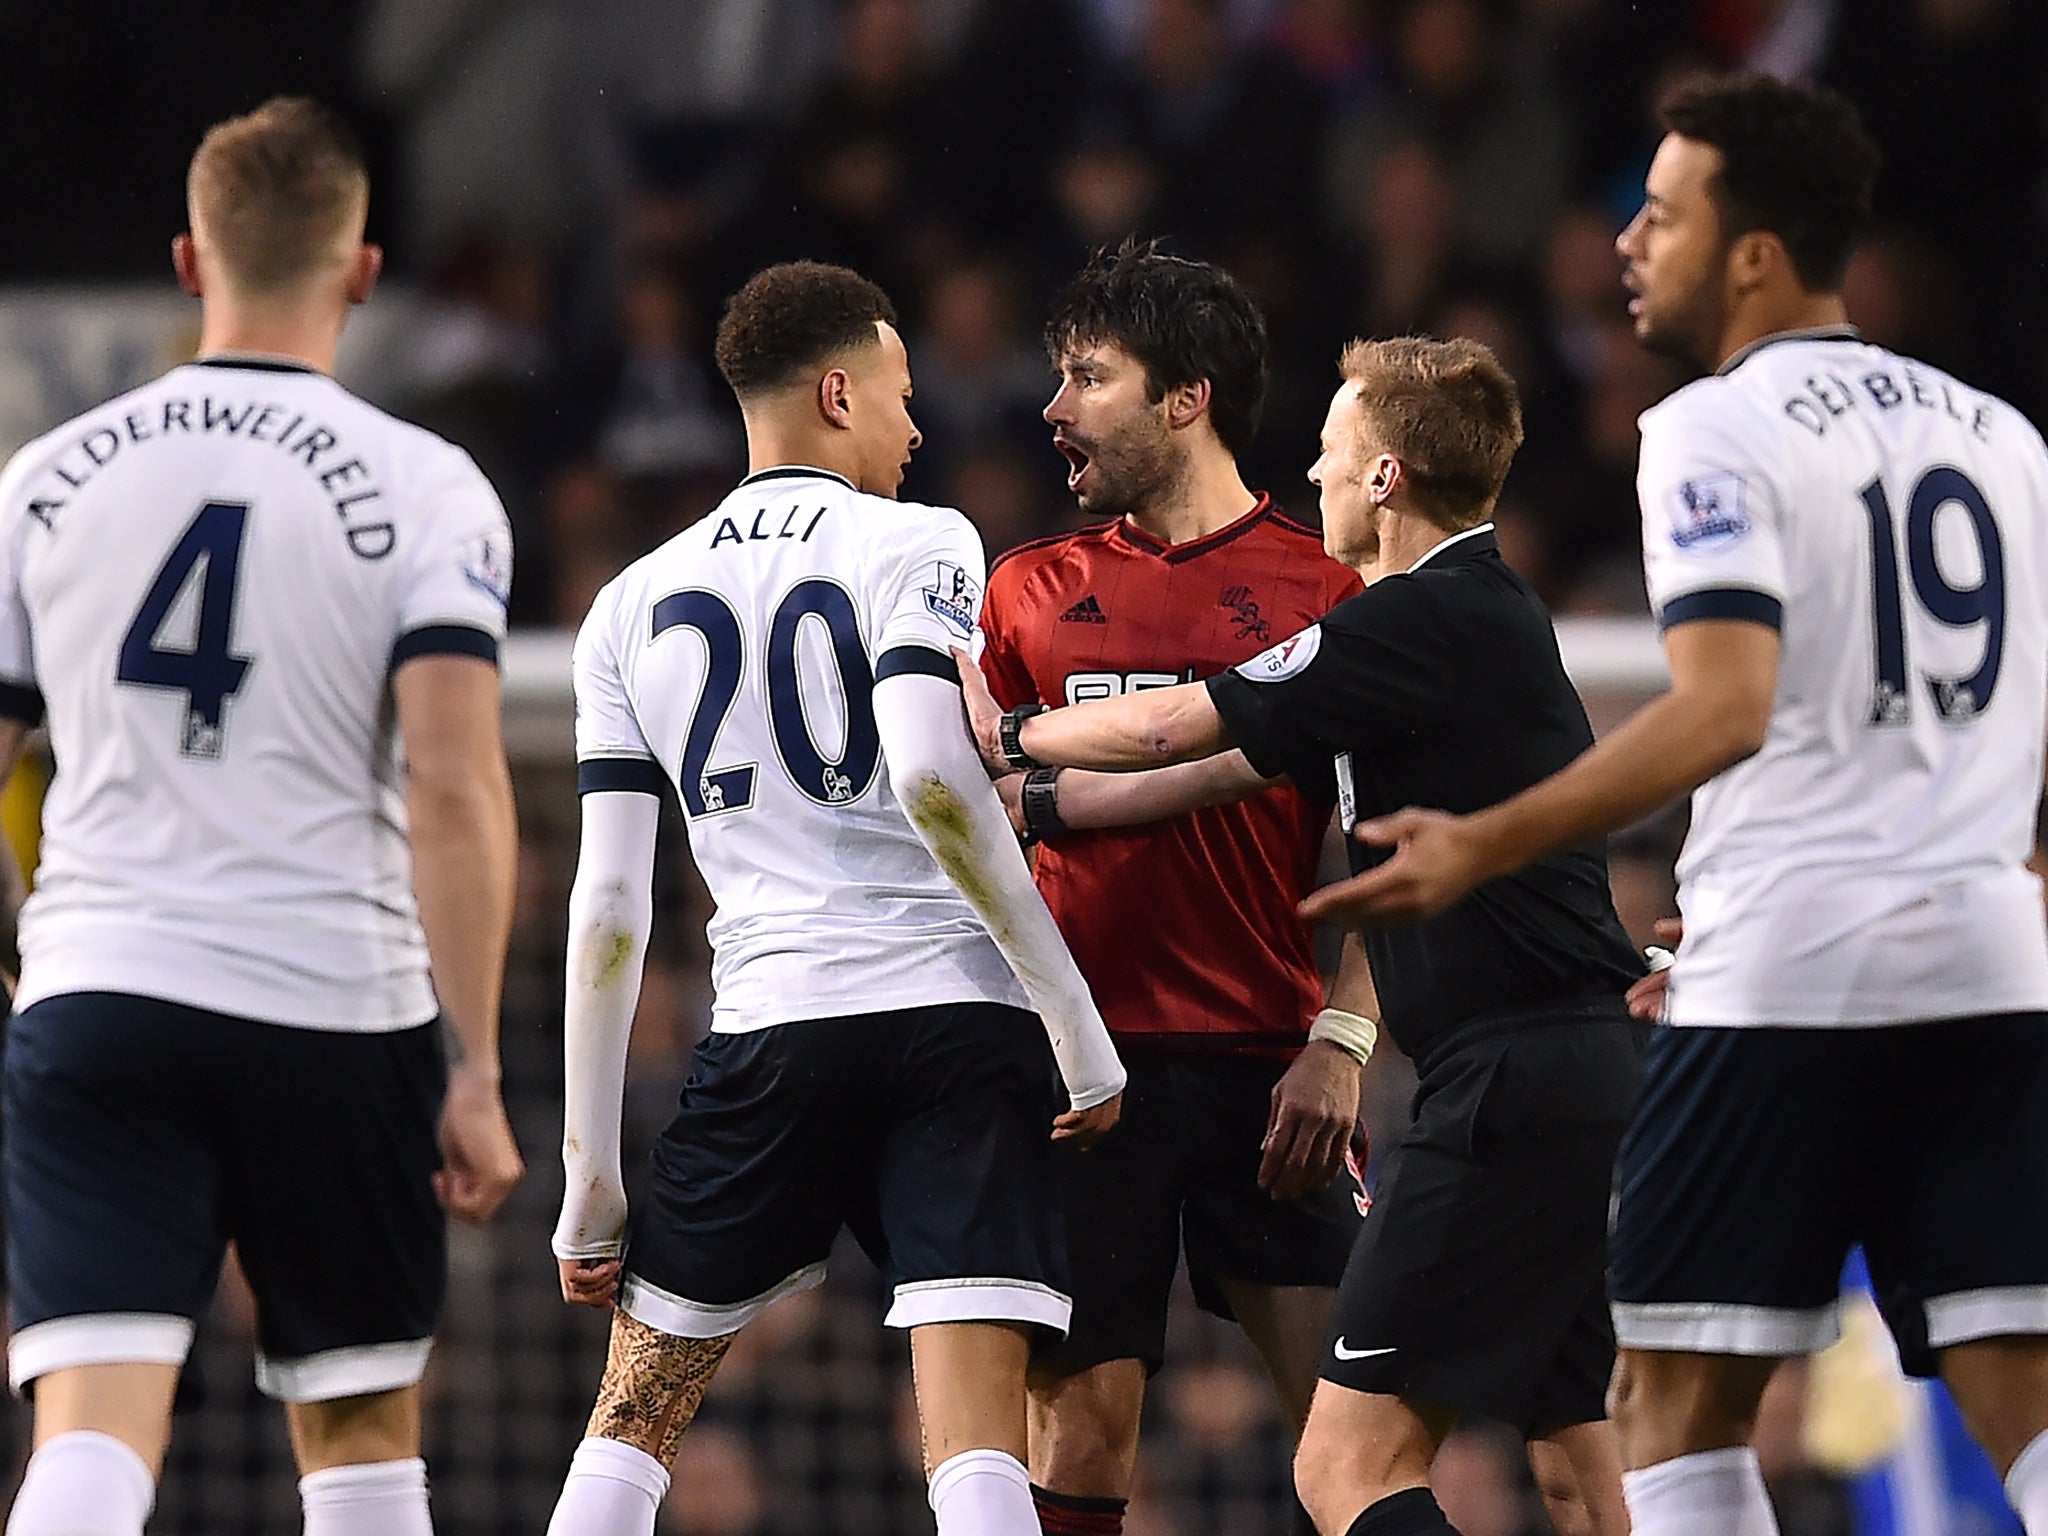 &#13;
Alli reacted to a string of strong tackles from Yacob &#13;